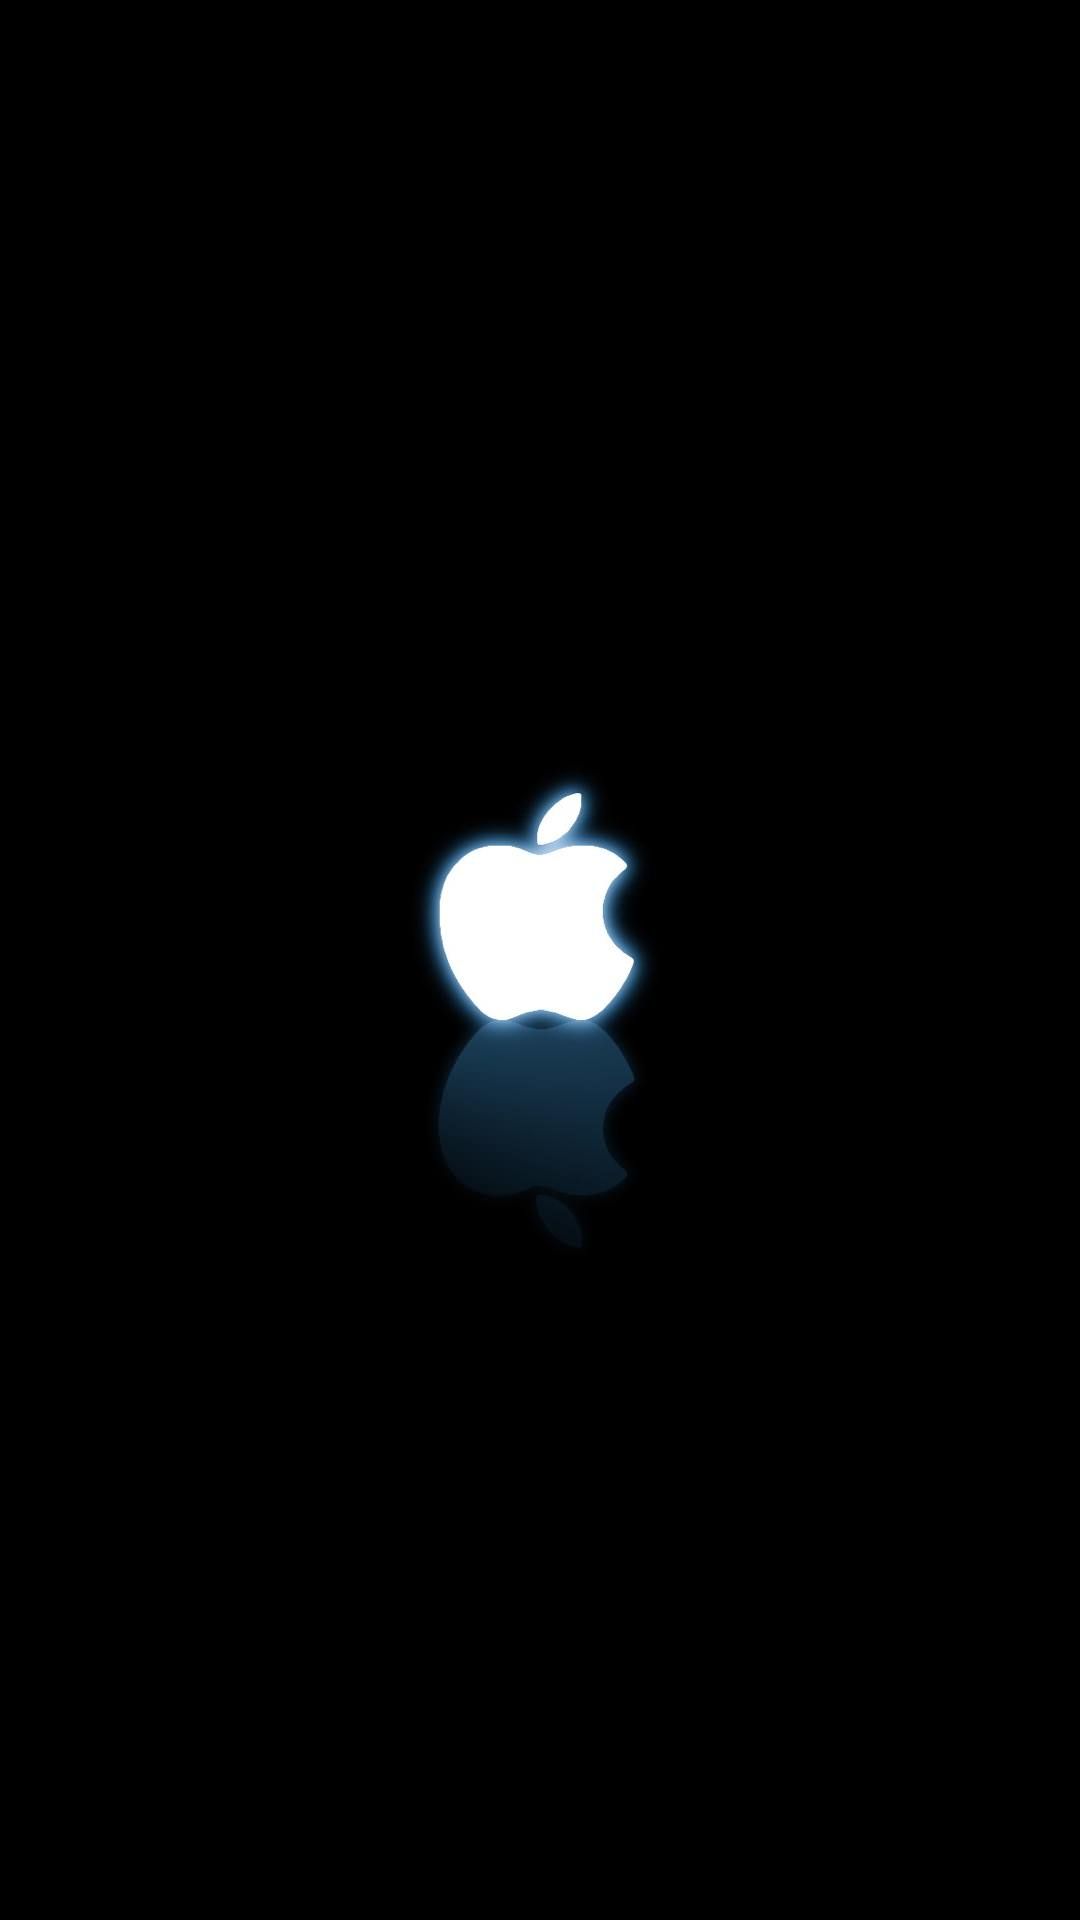 Black and white Apple logo   iPhone6 wallpapers Appletite 1080x1920